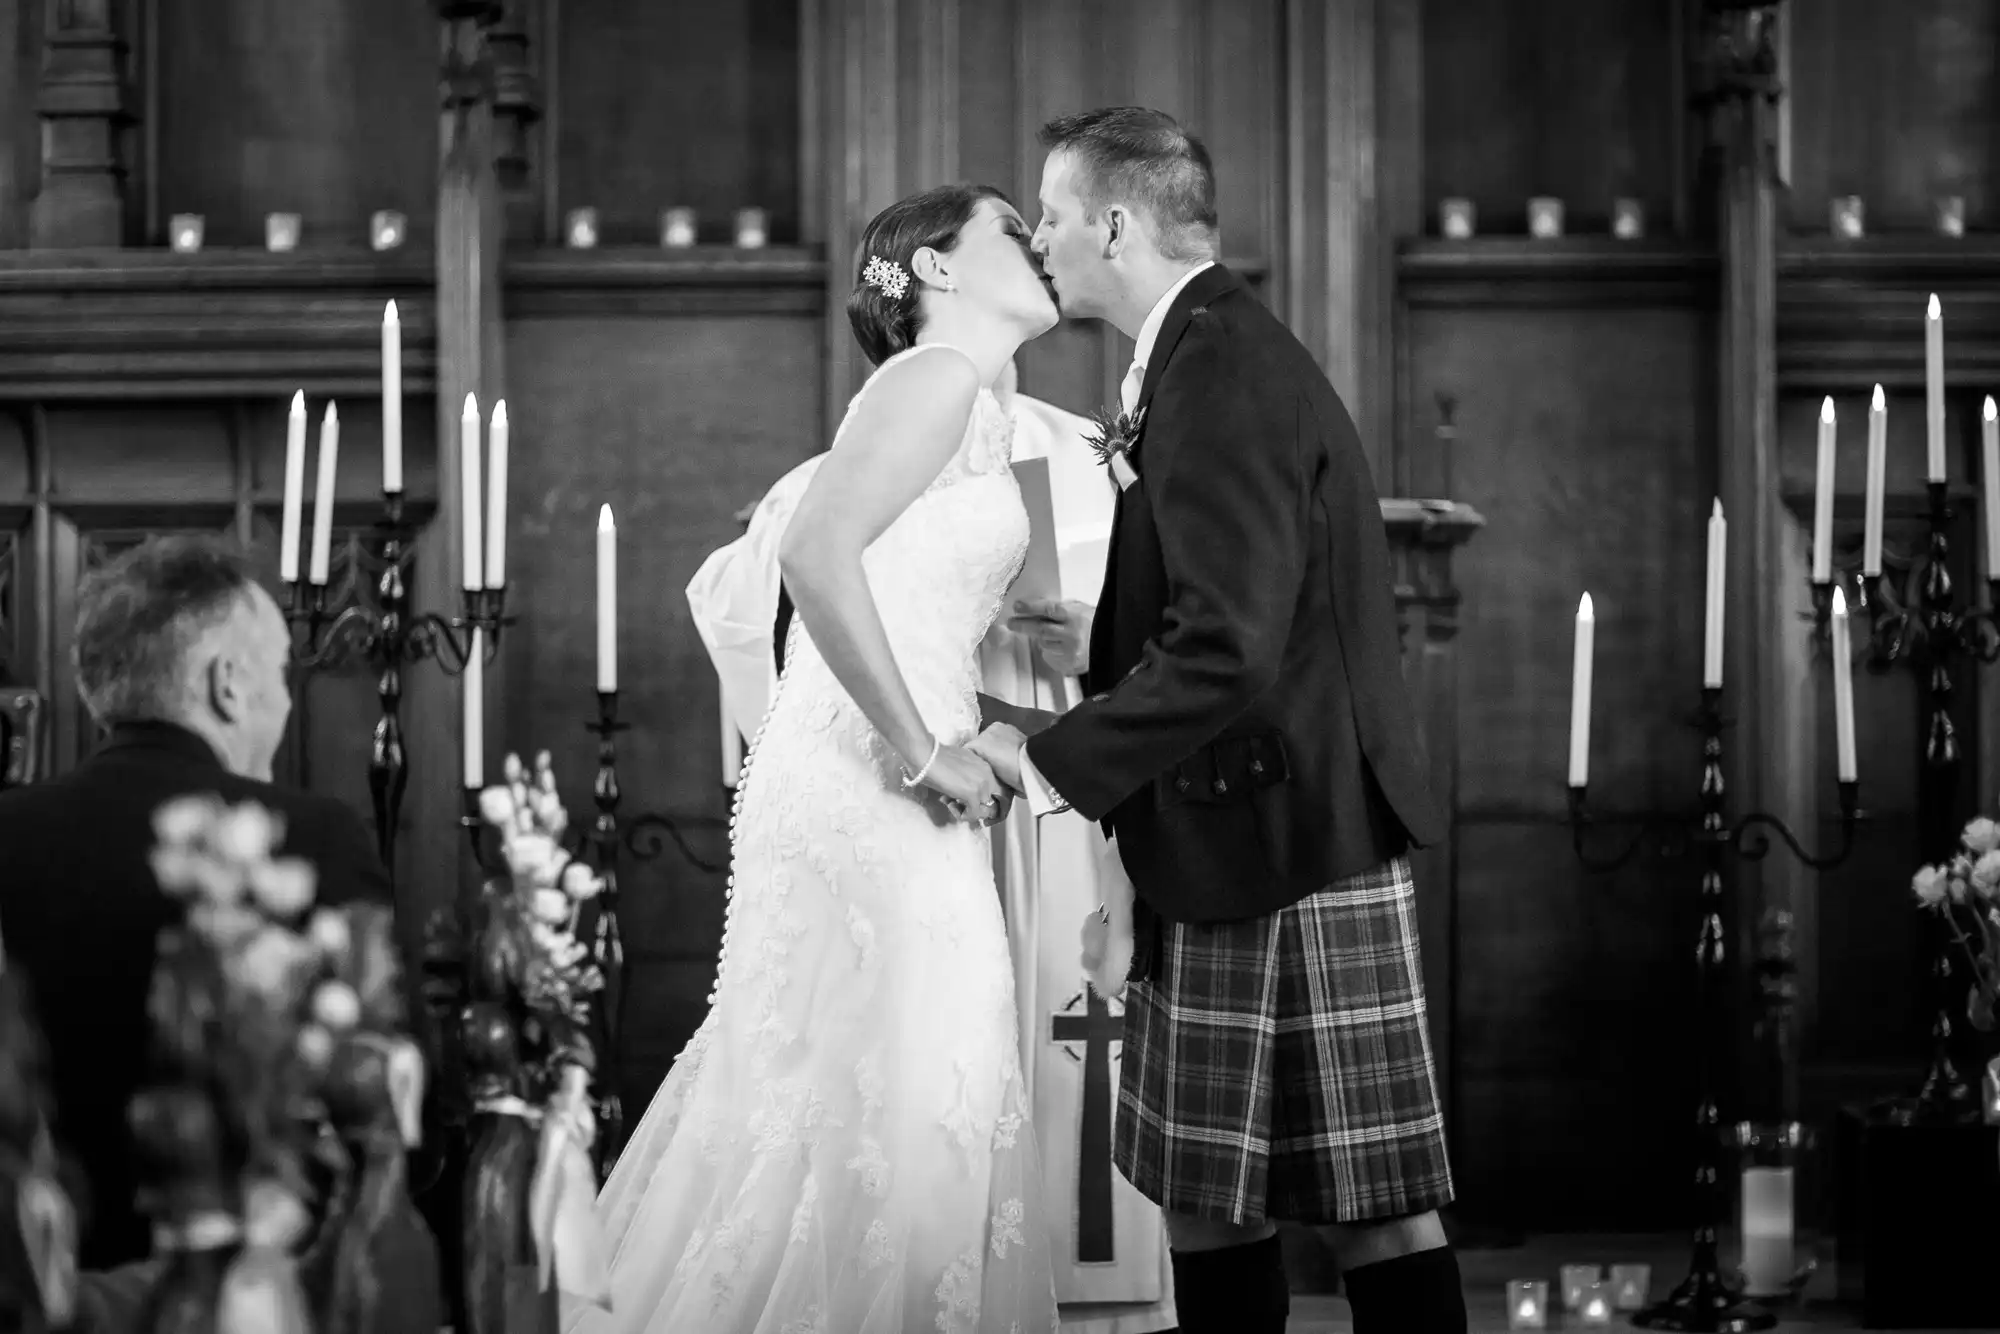 A bride in a white dress and a groom in a kilt share a kiss at their wedding inside a church with candlelit ambiance.